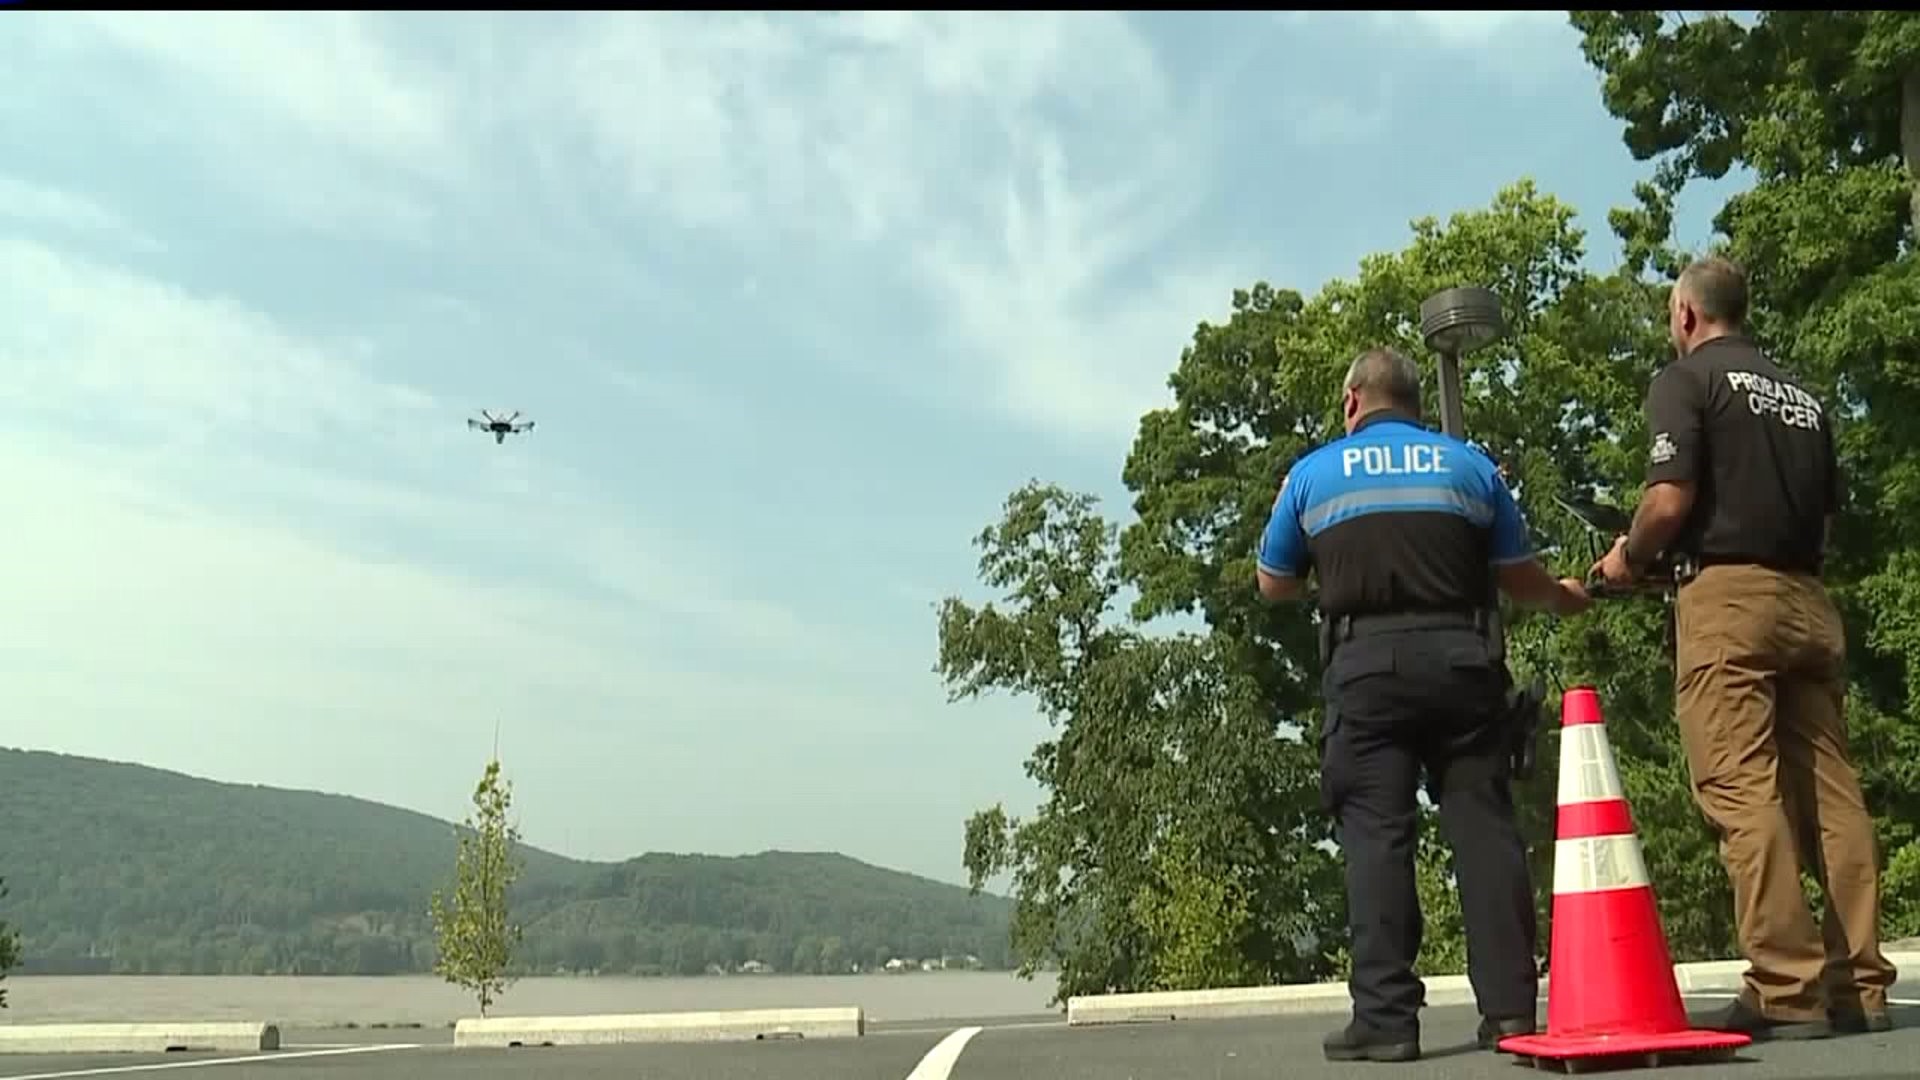 Drone to help fight crime in Dauphin County